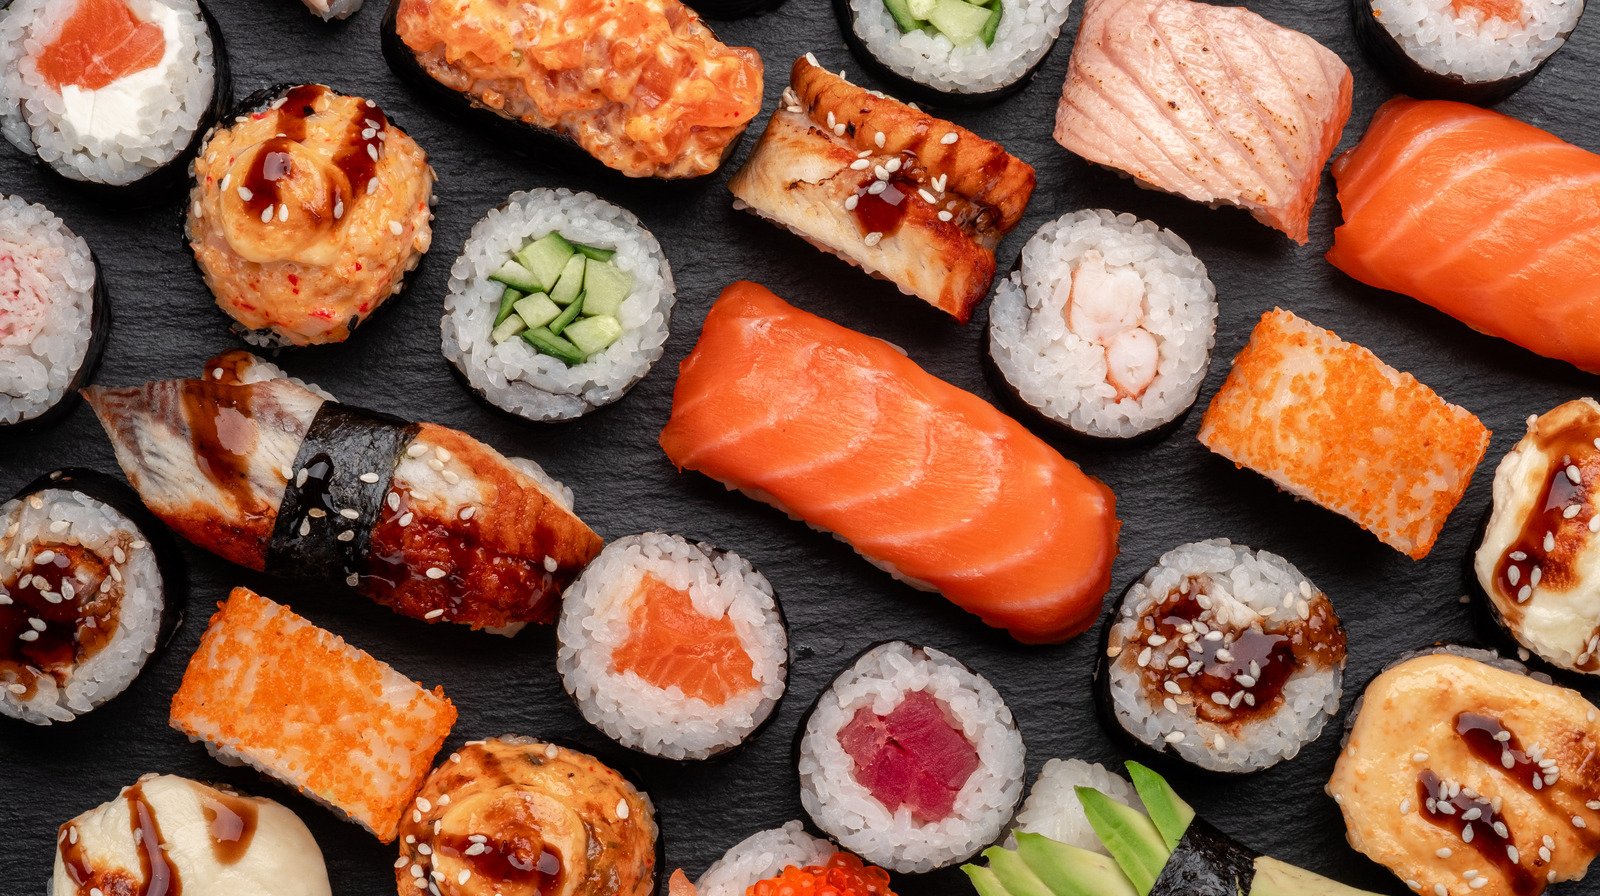 14 Items To Avoid Ordering At A Sushi Restaurant